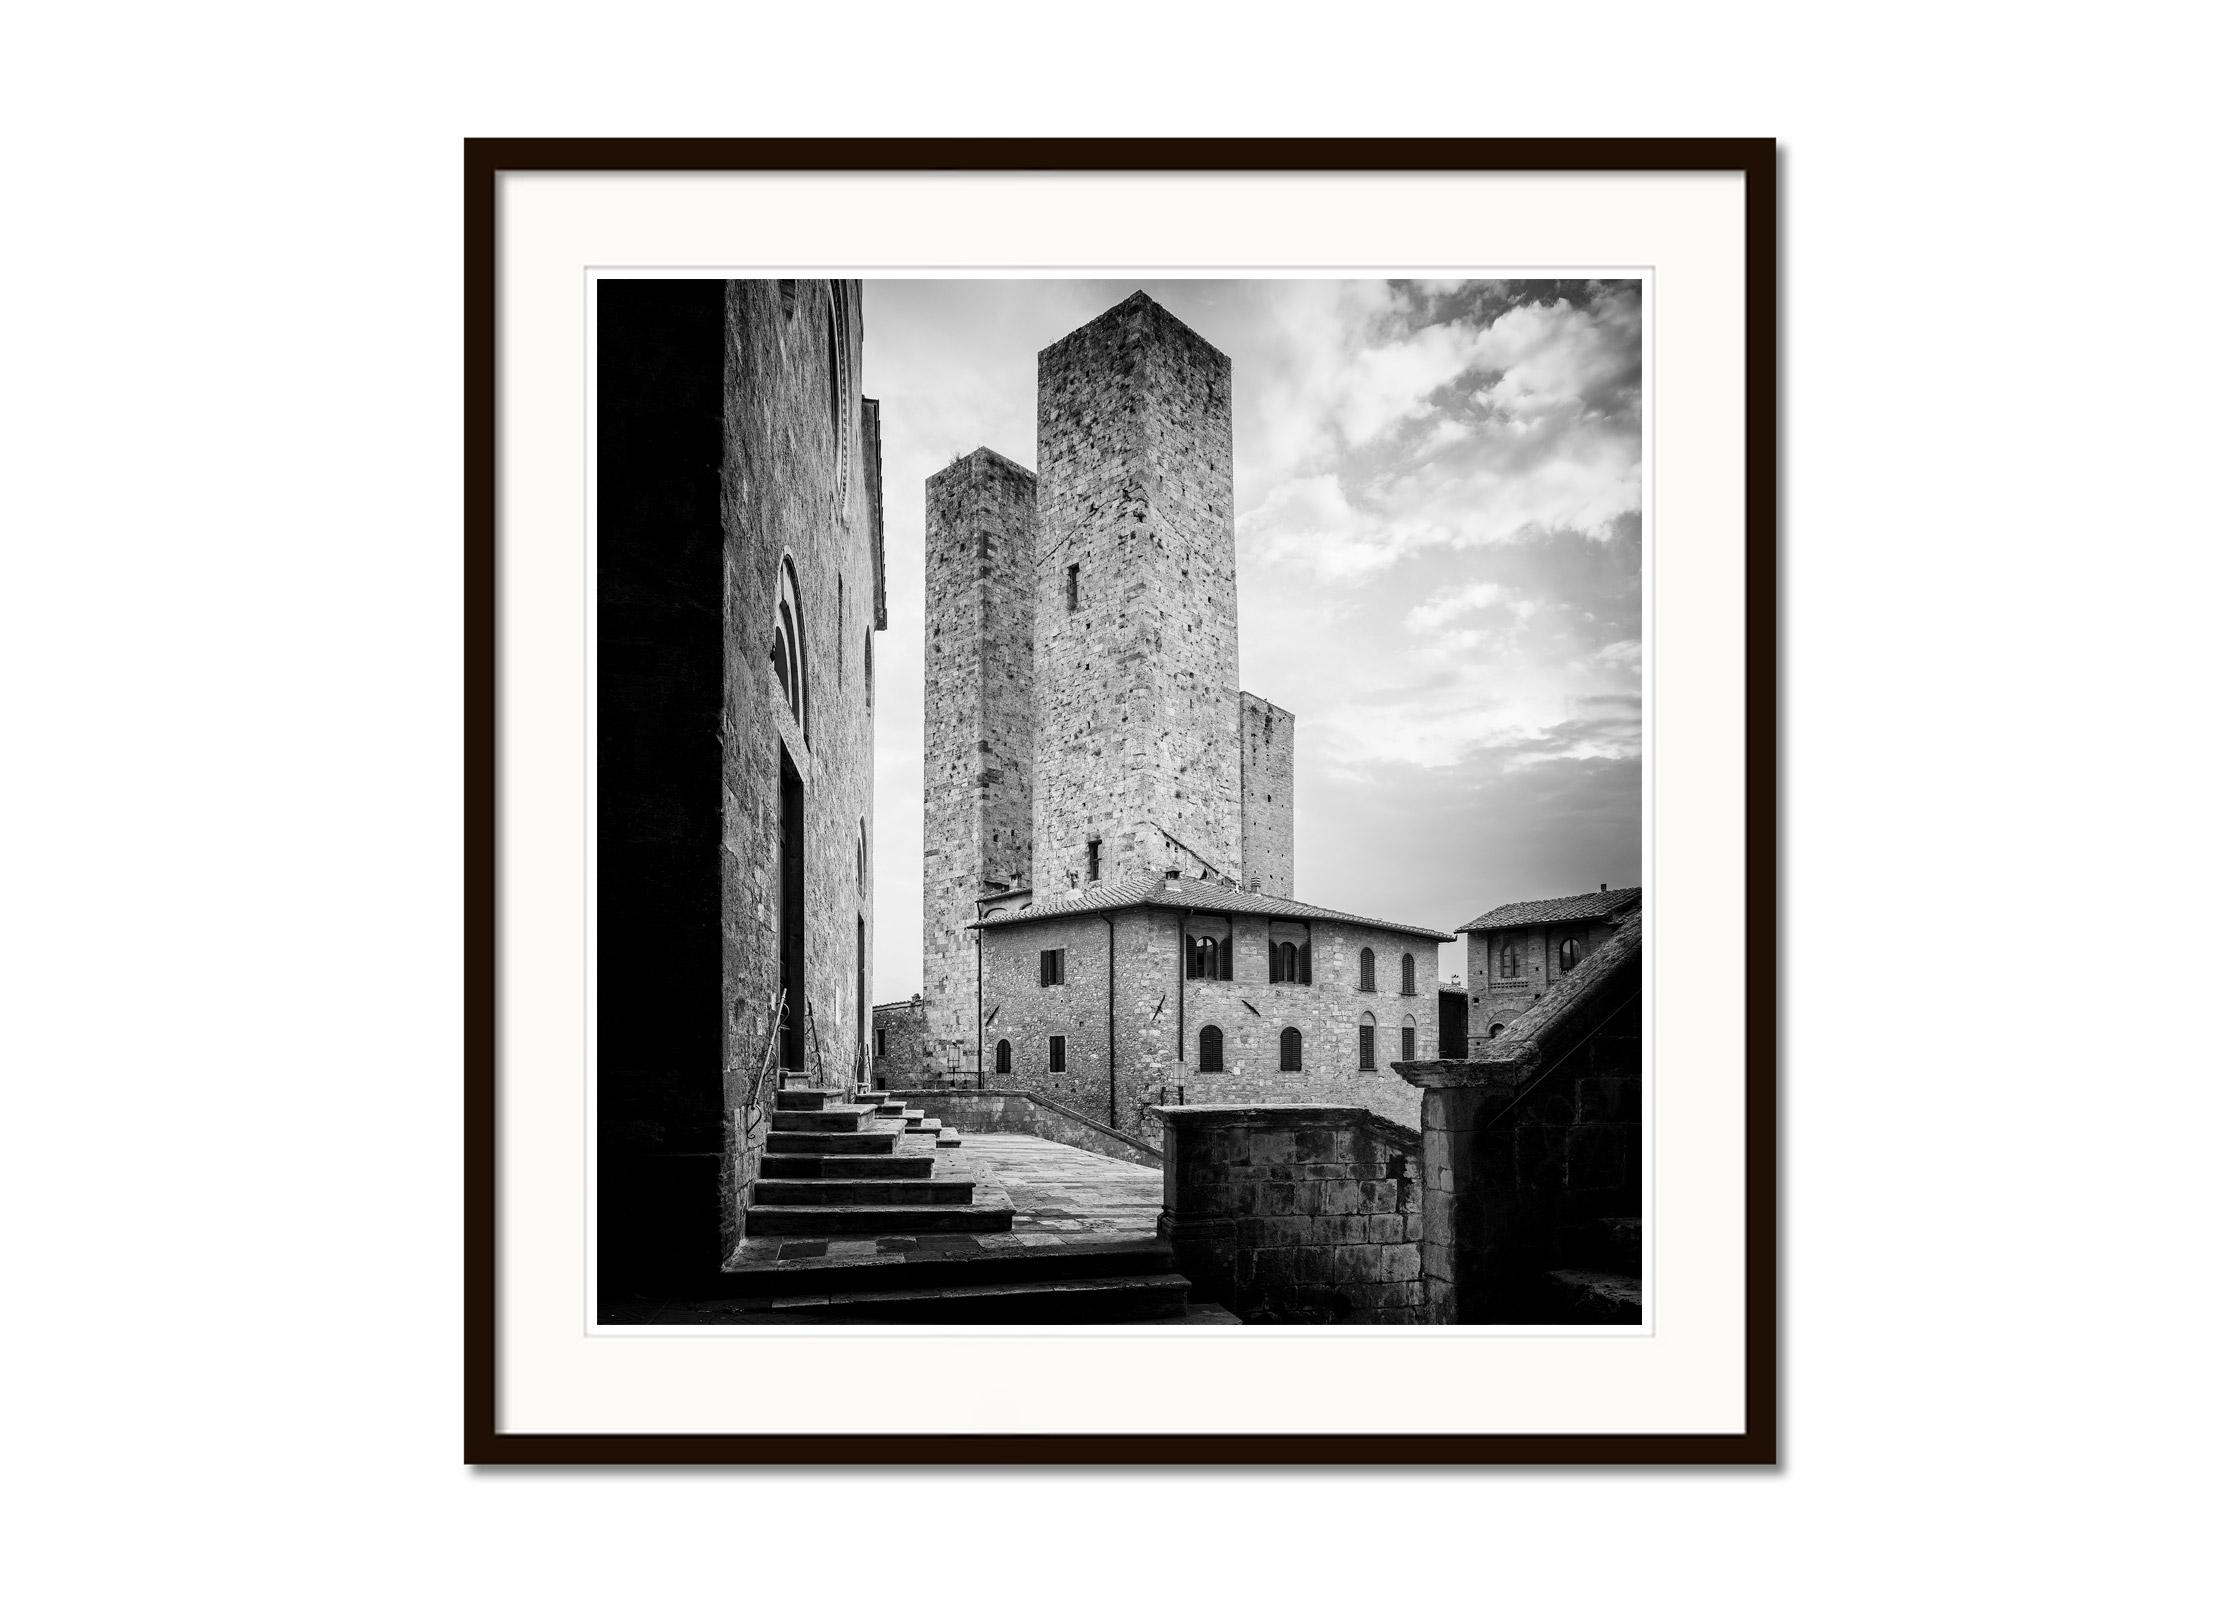 Black and white fine art cityscape photography. Archival pigment ink print as part of a limited edition of 7. All Gerald Berghammer prints are made to order in limited editions on Hahnemuehle Photo Rag Baryta. Each print is stamped on the back and